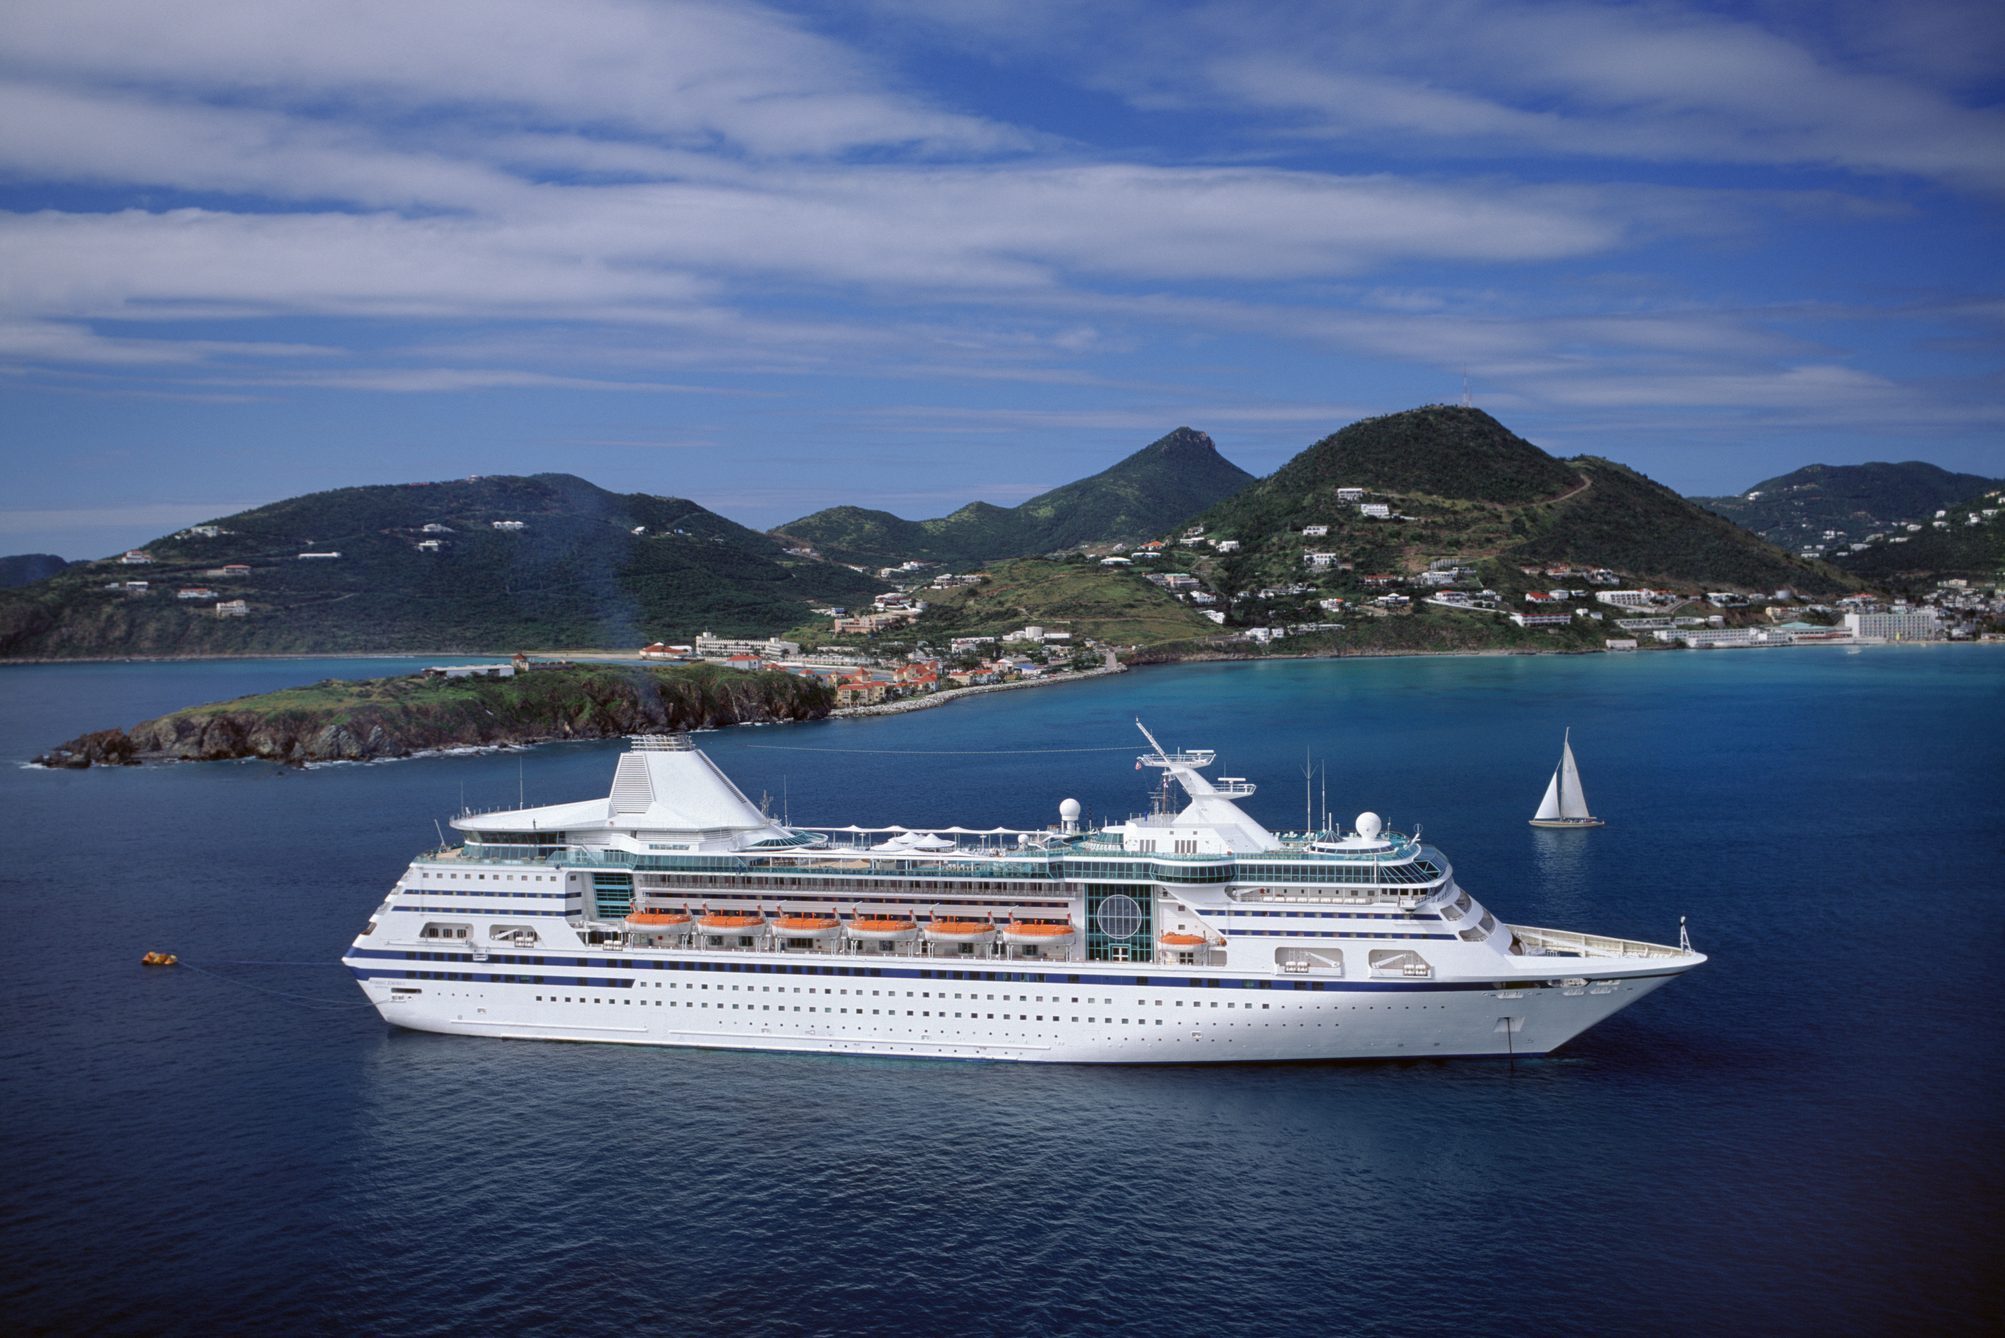 <p>It's no wonder cruising in and around the Caribbean is so popular. But with so many ships—50,000 yearly—offering up exciting itineraries from a variety of departure ports, not to mention the number of islands the ships call on, finding the best Caribbean cruise can seem downright overwhelming! We're here to help by breaking down the options with all the best Caribbean cruises. Whether you want an affordable warm-weather family cruise, a luxury couples getaway or a solo cruise to meet new people, we've got the scoop.</p> <p>If you're in the market for the best deal on a Caribbean cruise, there are two seasons to be aware of. Between January and March is what's known as "wave season." This is when the cruise lines promote deeply discounted fares for the best Caribbean cruises. Or you can choose to shop around for sailings during the fall, when prices tend to be low because of hurricane season. Don't worry, though—the captains of the ships are well-versed in avoiding stormy weather.</p> <h2 class="">How we chose the best Caribbean cruises</h2> <p>Not only did I rely on my own personal experiences at sea (I've taken eight cruises in the past year alone, and I've been cruising for about a decade), but I also scoured websites to find the <a href="https://www.rd.com/list/best-cruises-lines/" rel="noopener noreferrer">best cruise lines</a> based on the many different types of travelers, from those who want to snorkel every day to cruisers who want nothing more than a sunny deck chair by the pool. Now, all <em>you</em> need to do is brush up on all the <a href="https://www.rd.com/list/things-you-wont-be-able-to-do-on-cruises-anymore/" rel="noopener noreferrer">things you can't do on cruises</a>, discover the many <a href="https://www.rd.com/list/hidden-cruise-features/" rel="noopener noreferrer">hidden cruise features</a>, decide if you want to add on a stay at one of the most glamorous <a href="https://www.rd.com/list/all-inclusive-resorts-caribbean/" rel="noopener noreferrer">all-inclusive Caribbean resorts</a> before or after your <a href="https://www.rd.com/list/cruise-tips/" rel="noopener noreferrer">cruise</a>, and then book your vacation!</p> <p><b>Get <i>Reader's Digest</i>’s </b><a href="https://www.rd.com/newsletter/?int_source=direct&int_medium=rd.com&int_campaign=nlrda_20221001_topperformingcontentnlsignup&int_placement=incontent"><b>Read Up newsletter</b></a><b> for more travel, tech, humor, cleaning and fun facts all week long.</b></p>